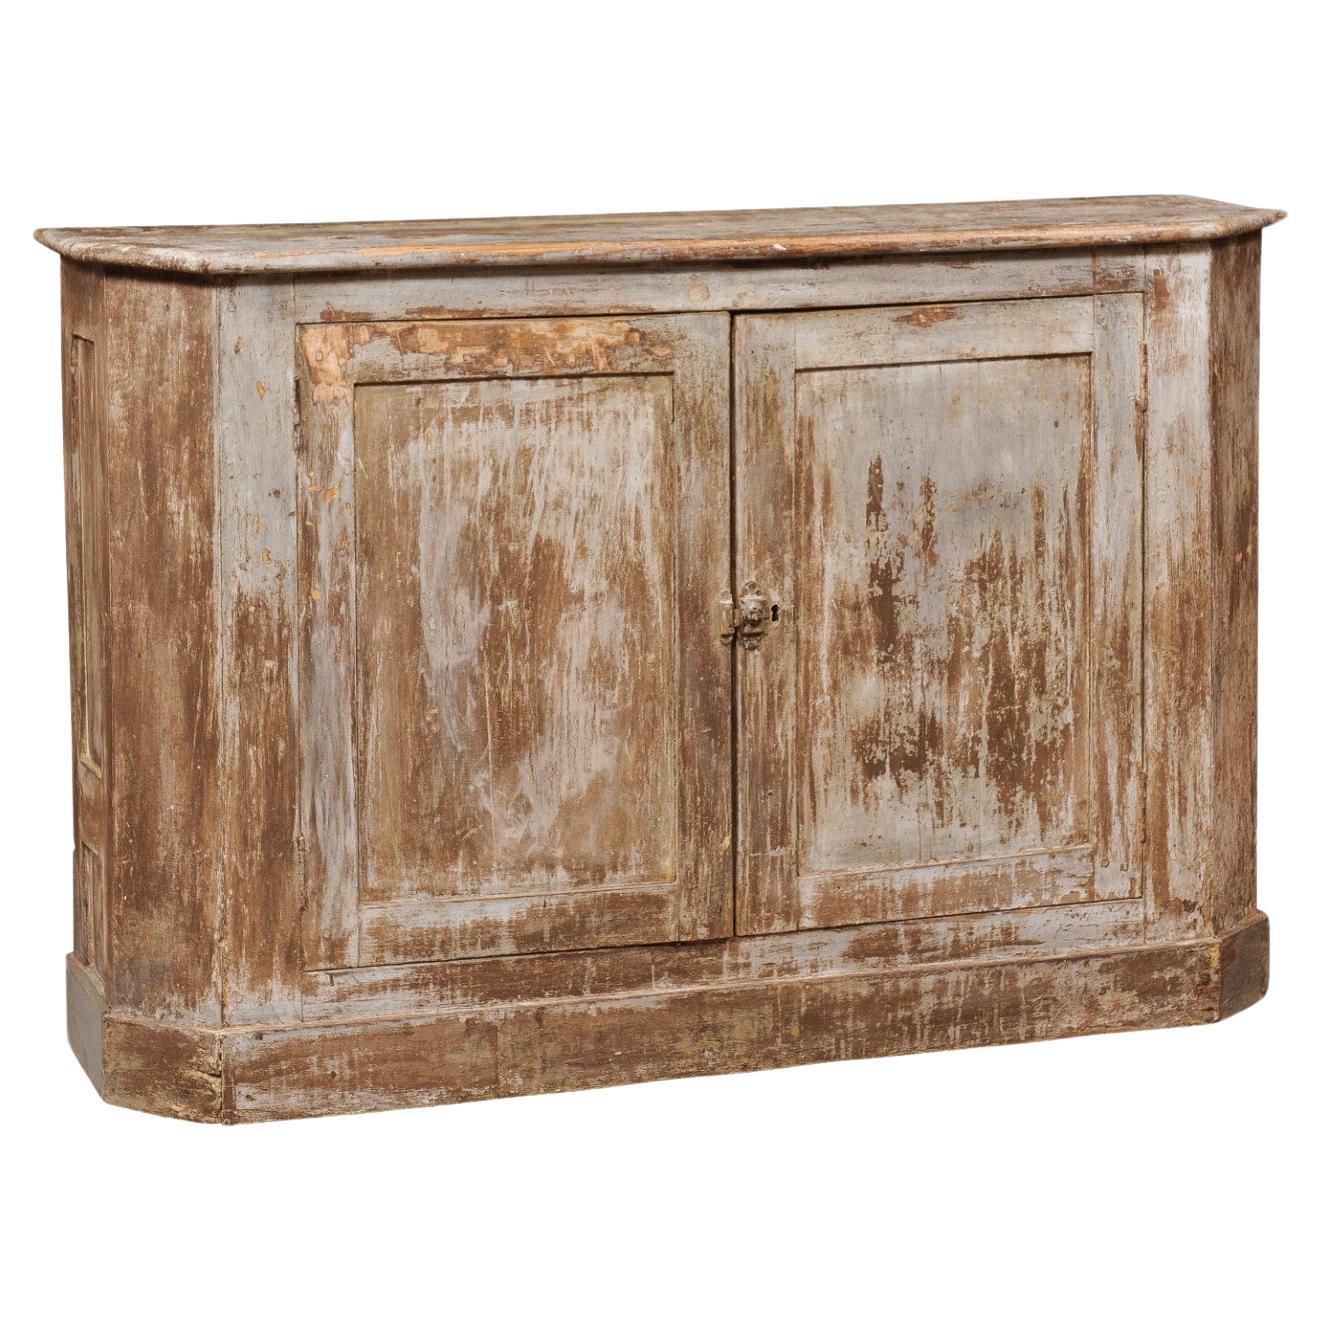 19th Century Italian Distressed Painted Credenza with Canted Sides